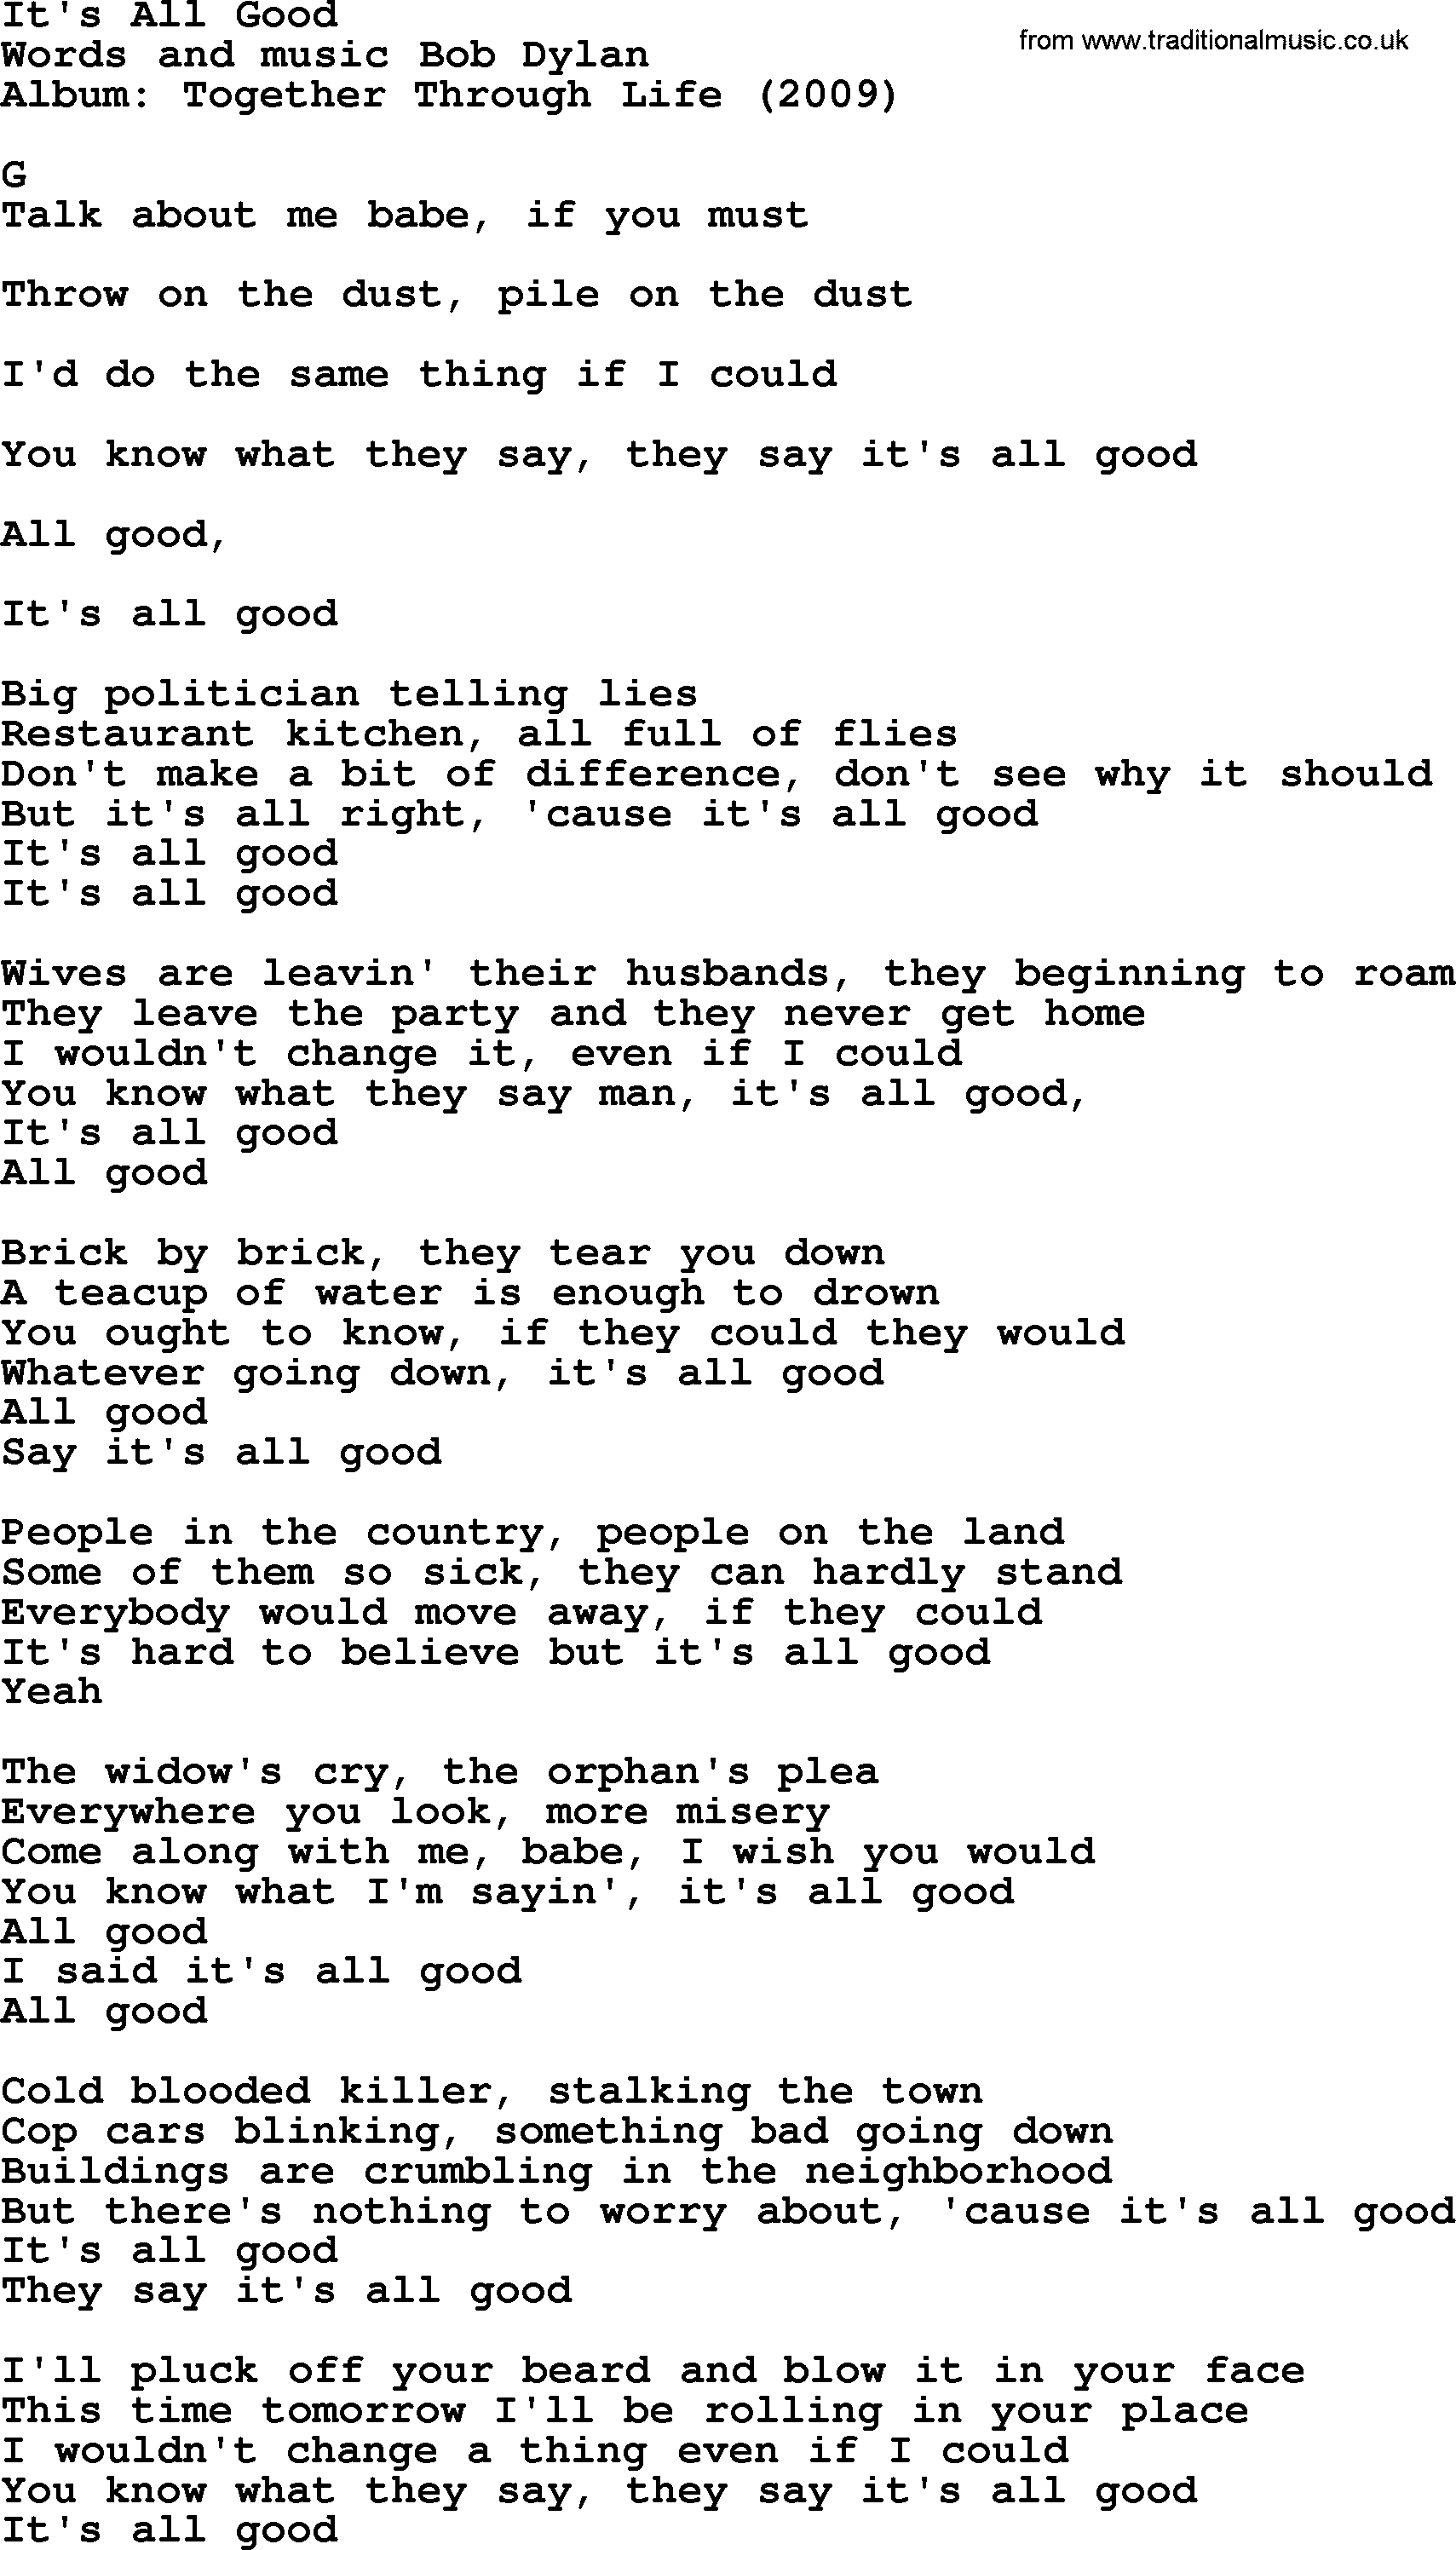 Bob Dylan song, lyrics with chords - It's All Good